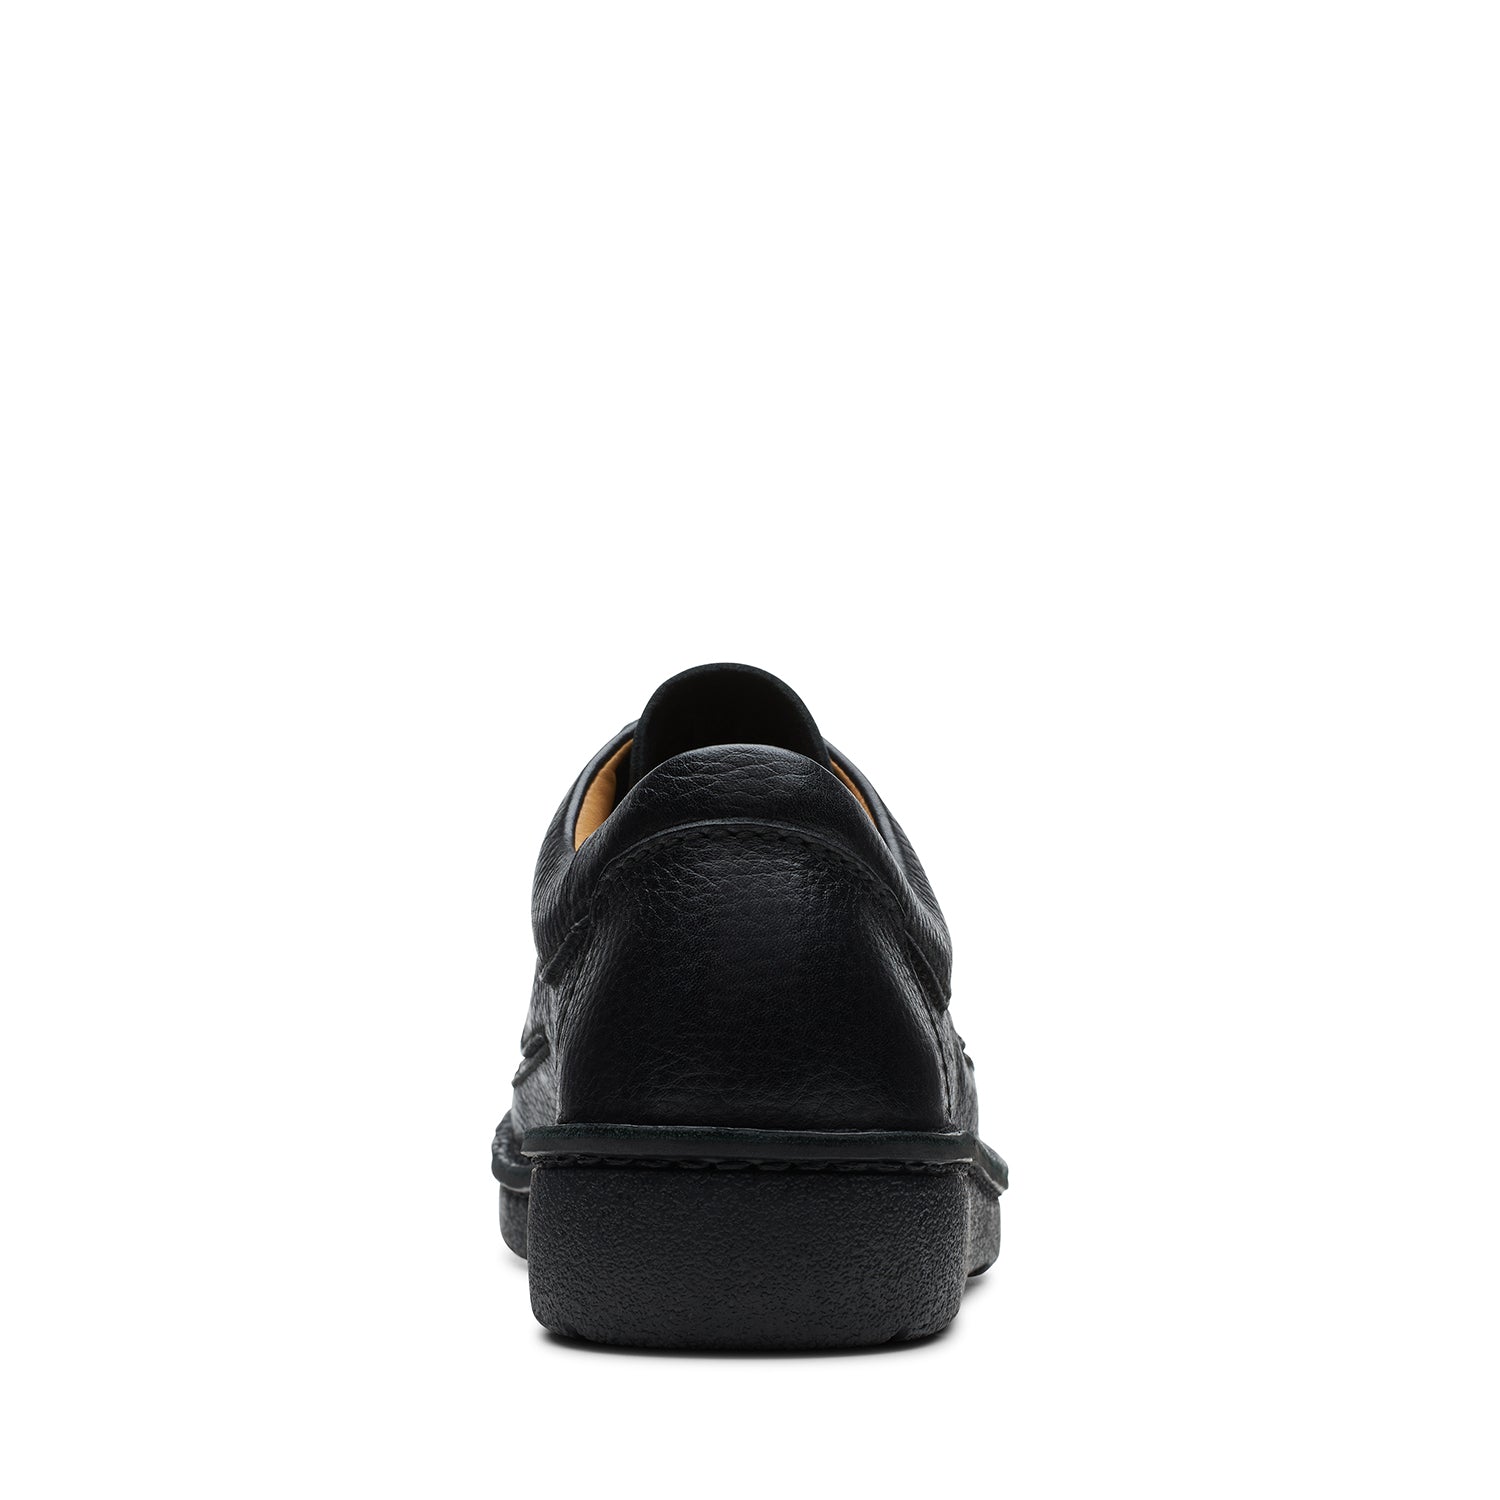 Clarks Nature Ii - Shoes - Black Grained Leather - 261420397 - G Width (Standard Fit)